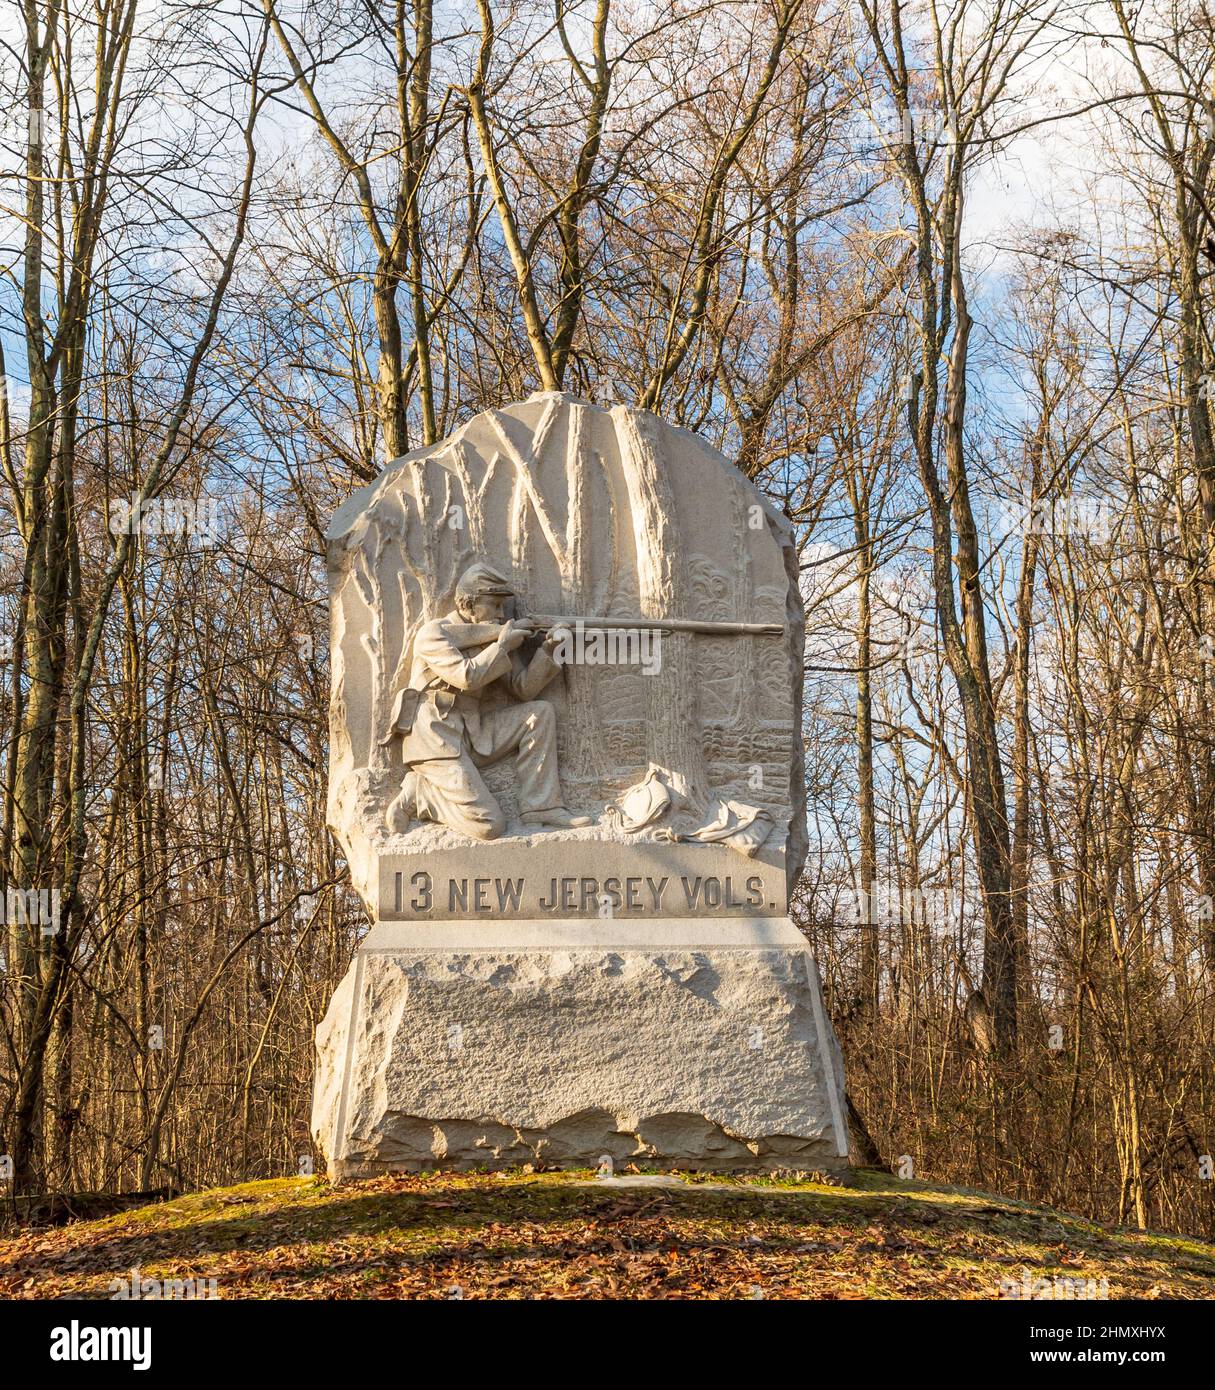 The monument to the 13th New Jersey Volunteer Infantry Regiment on Carman Avenue on Culp's Hill in Gettysburg, Pennsylvania, USA Stock Photo